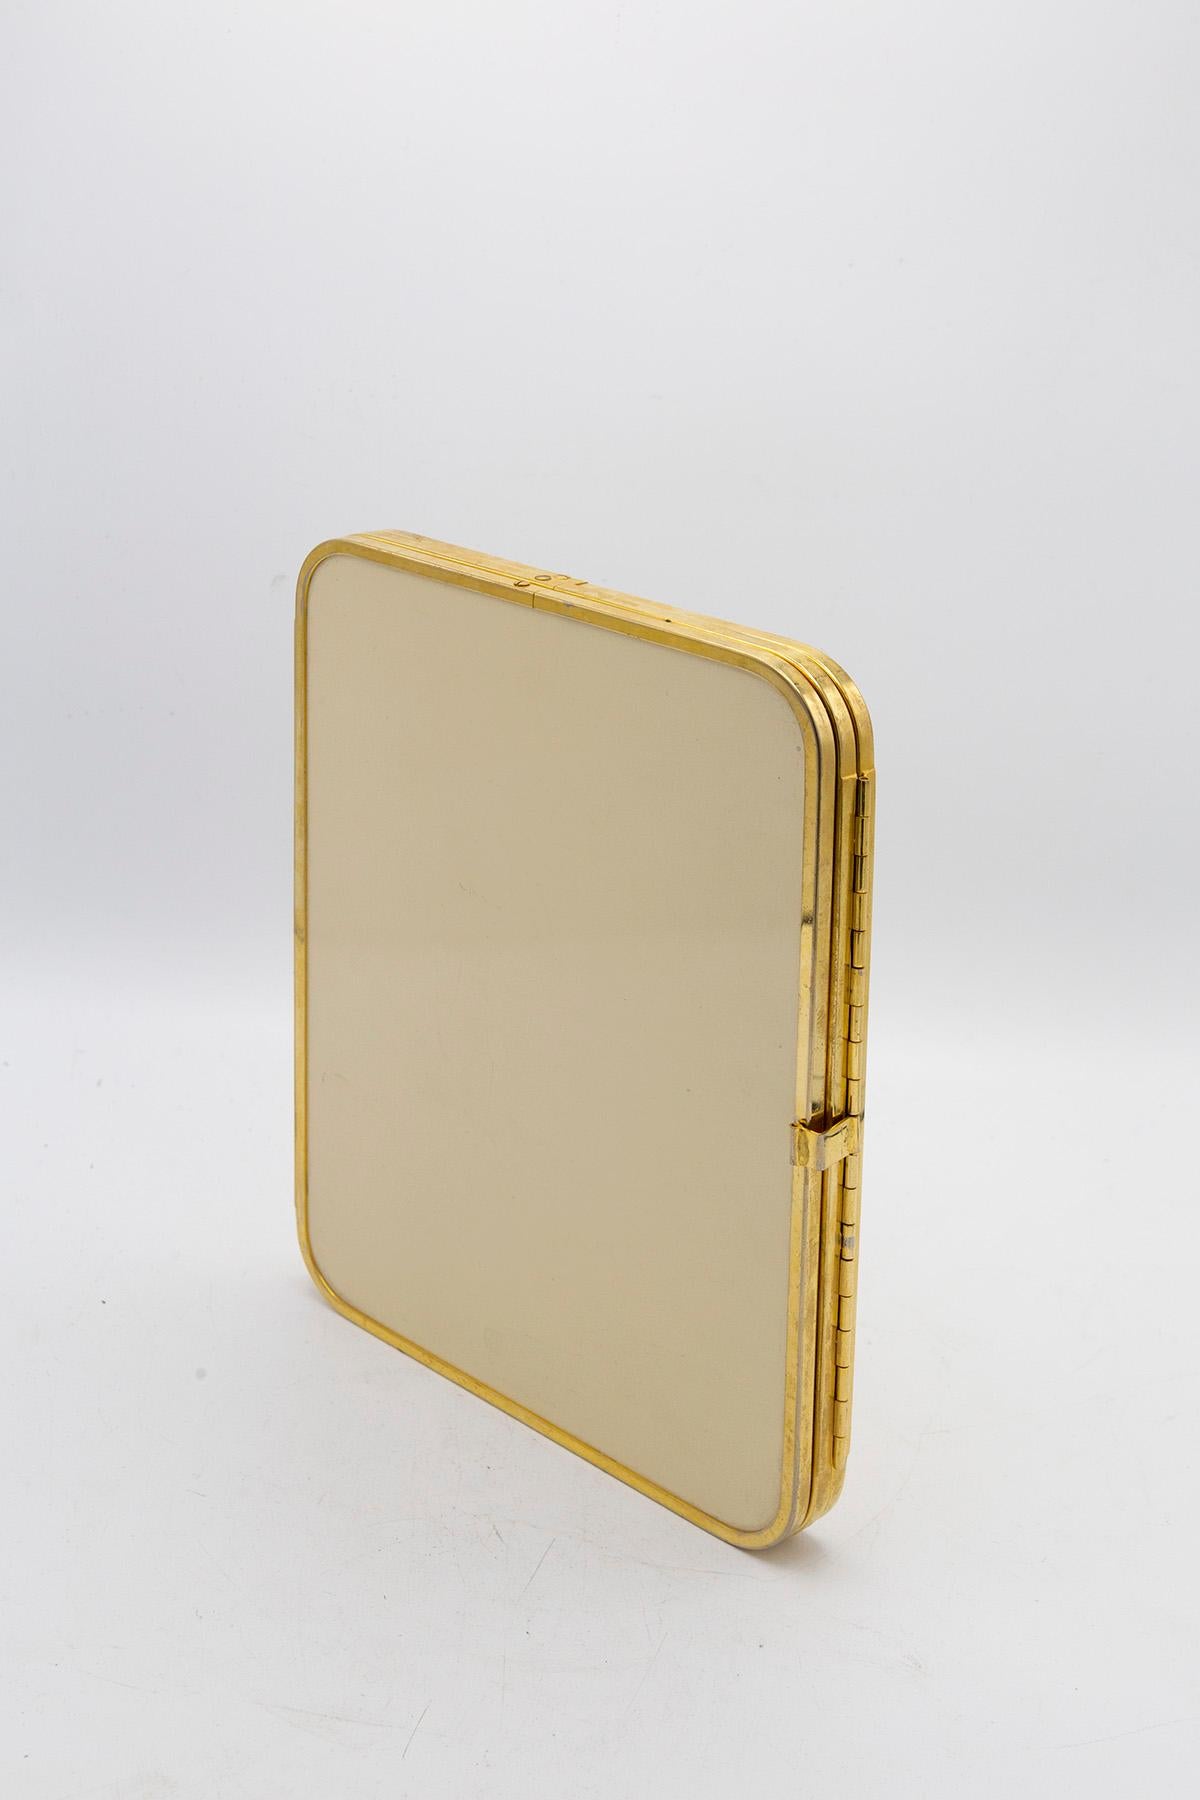 Italian Vanity Mirror Triptych in Brass and Formica In Good Condition For Sale In Milano, IT